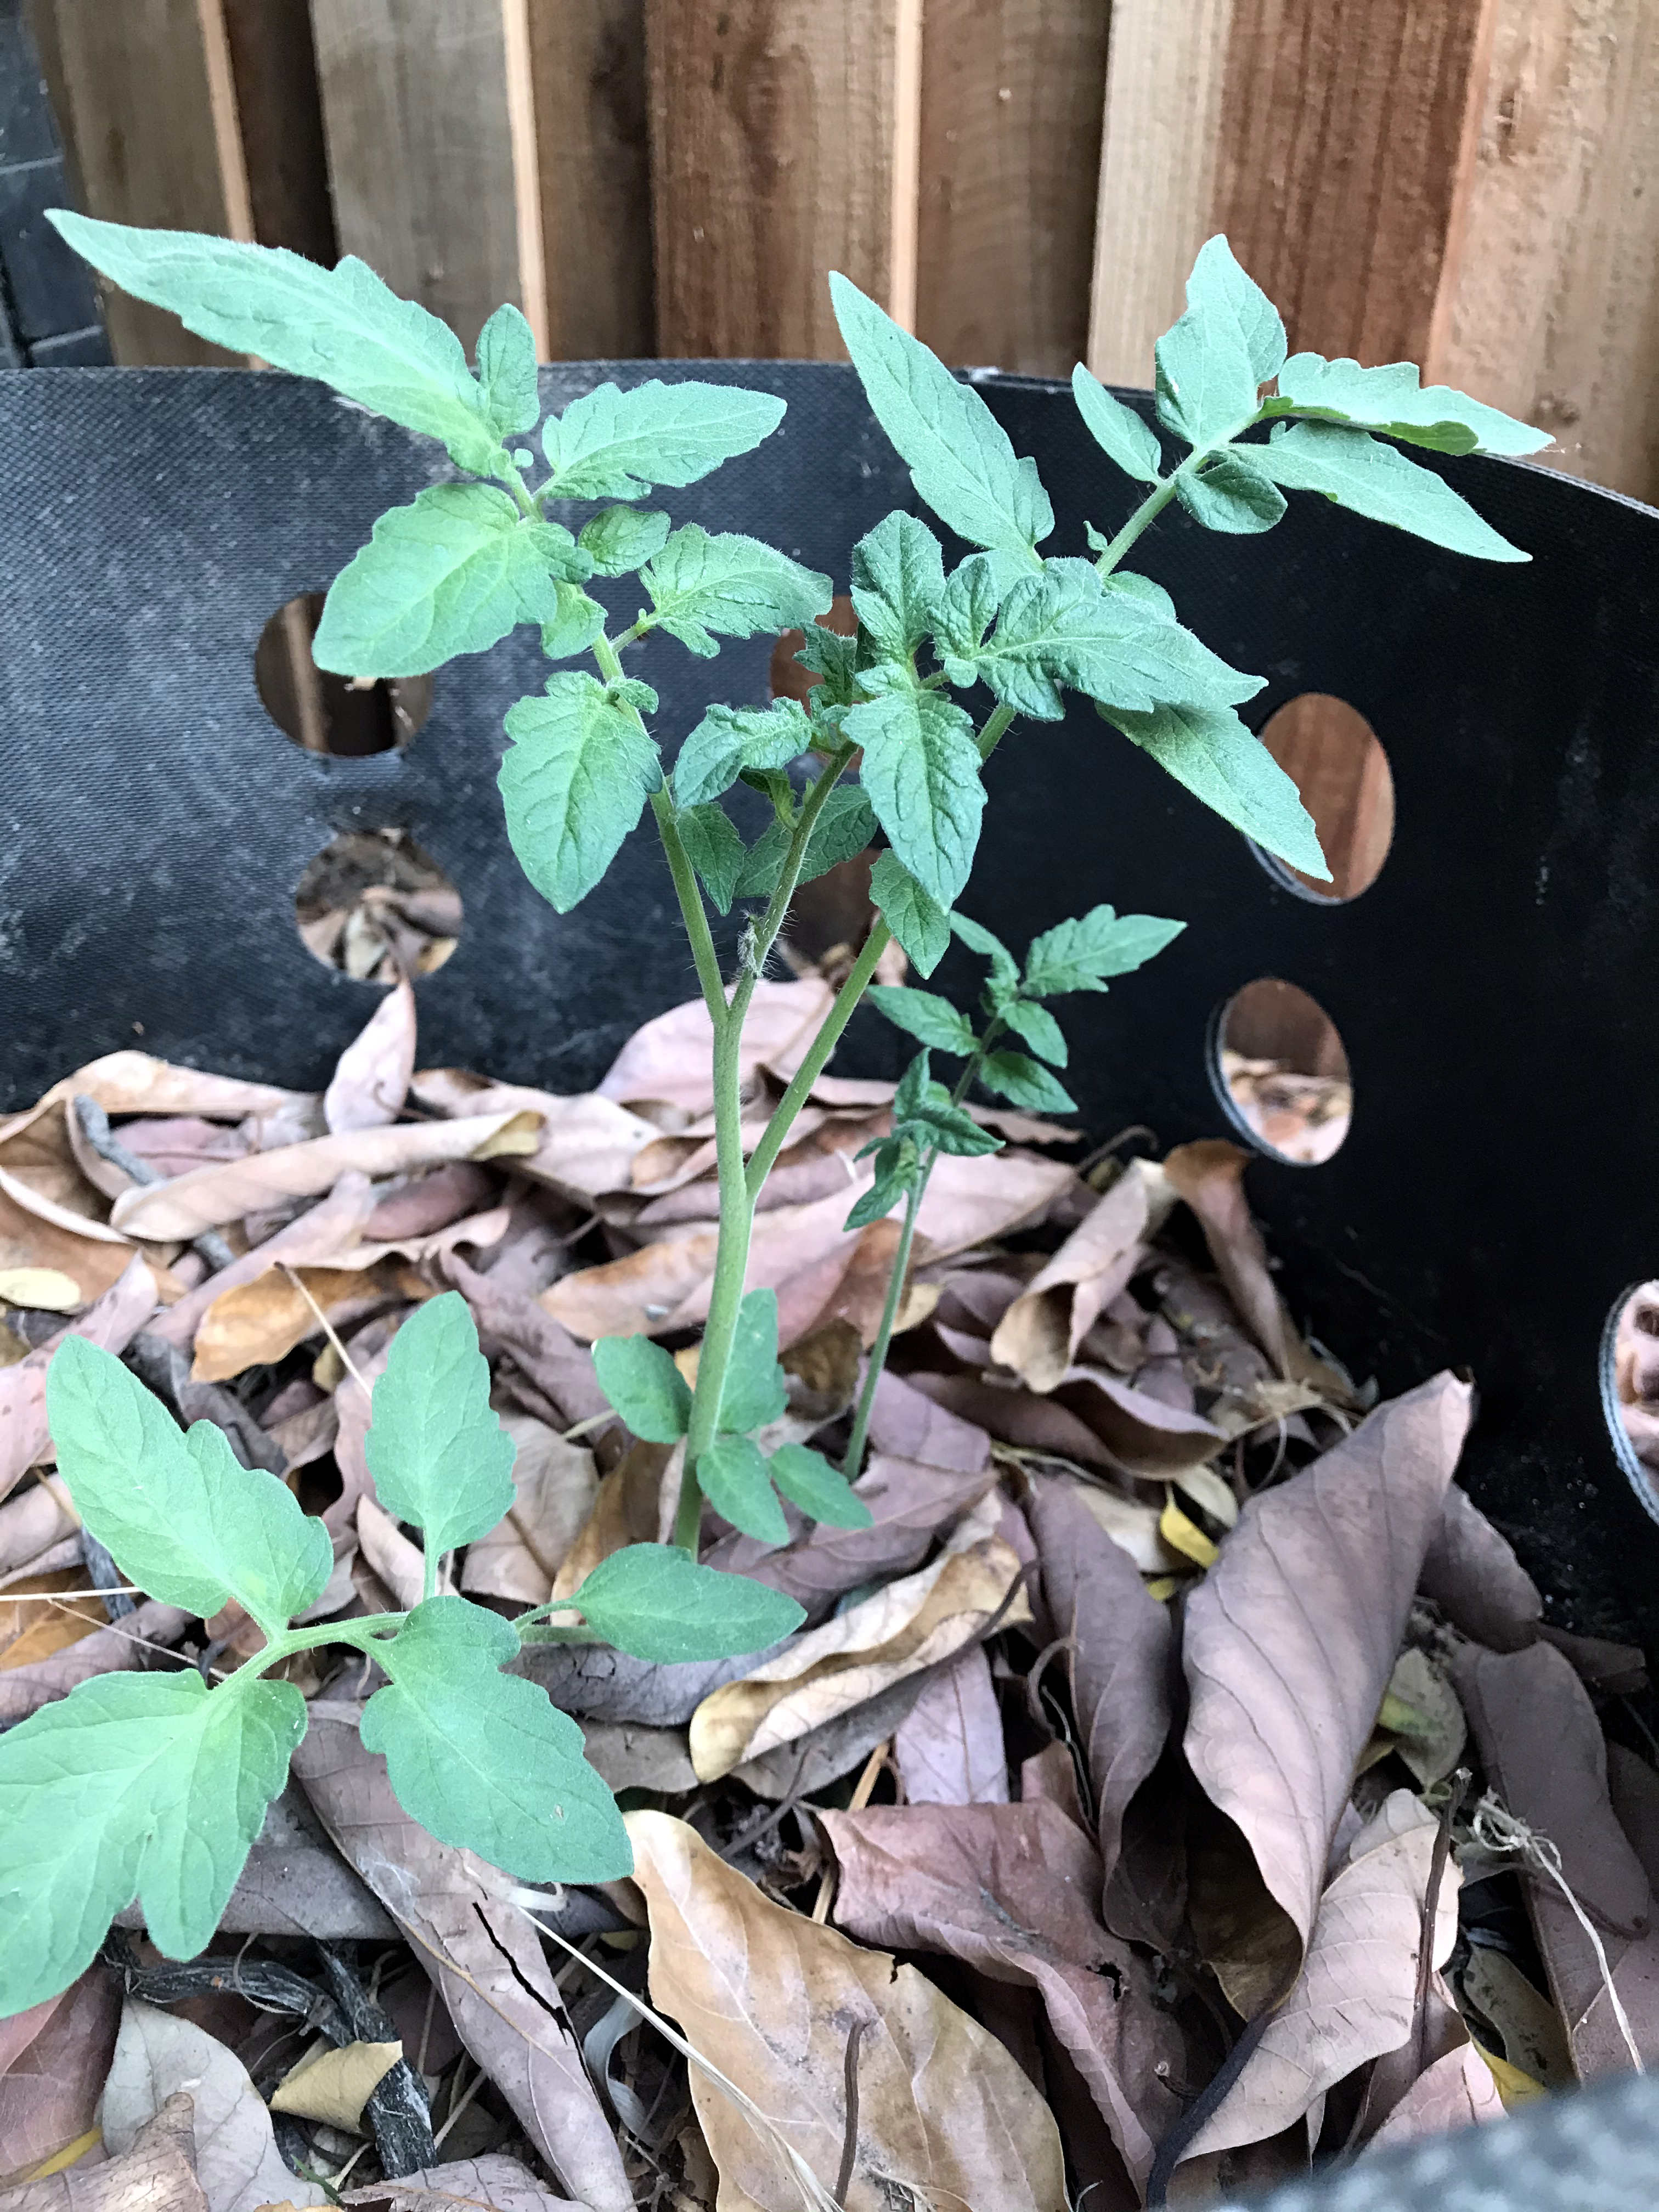 a rogue tomato plant growing in the compost bin